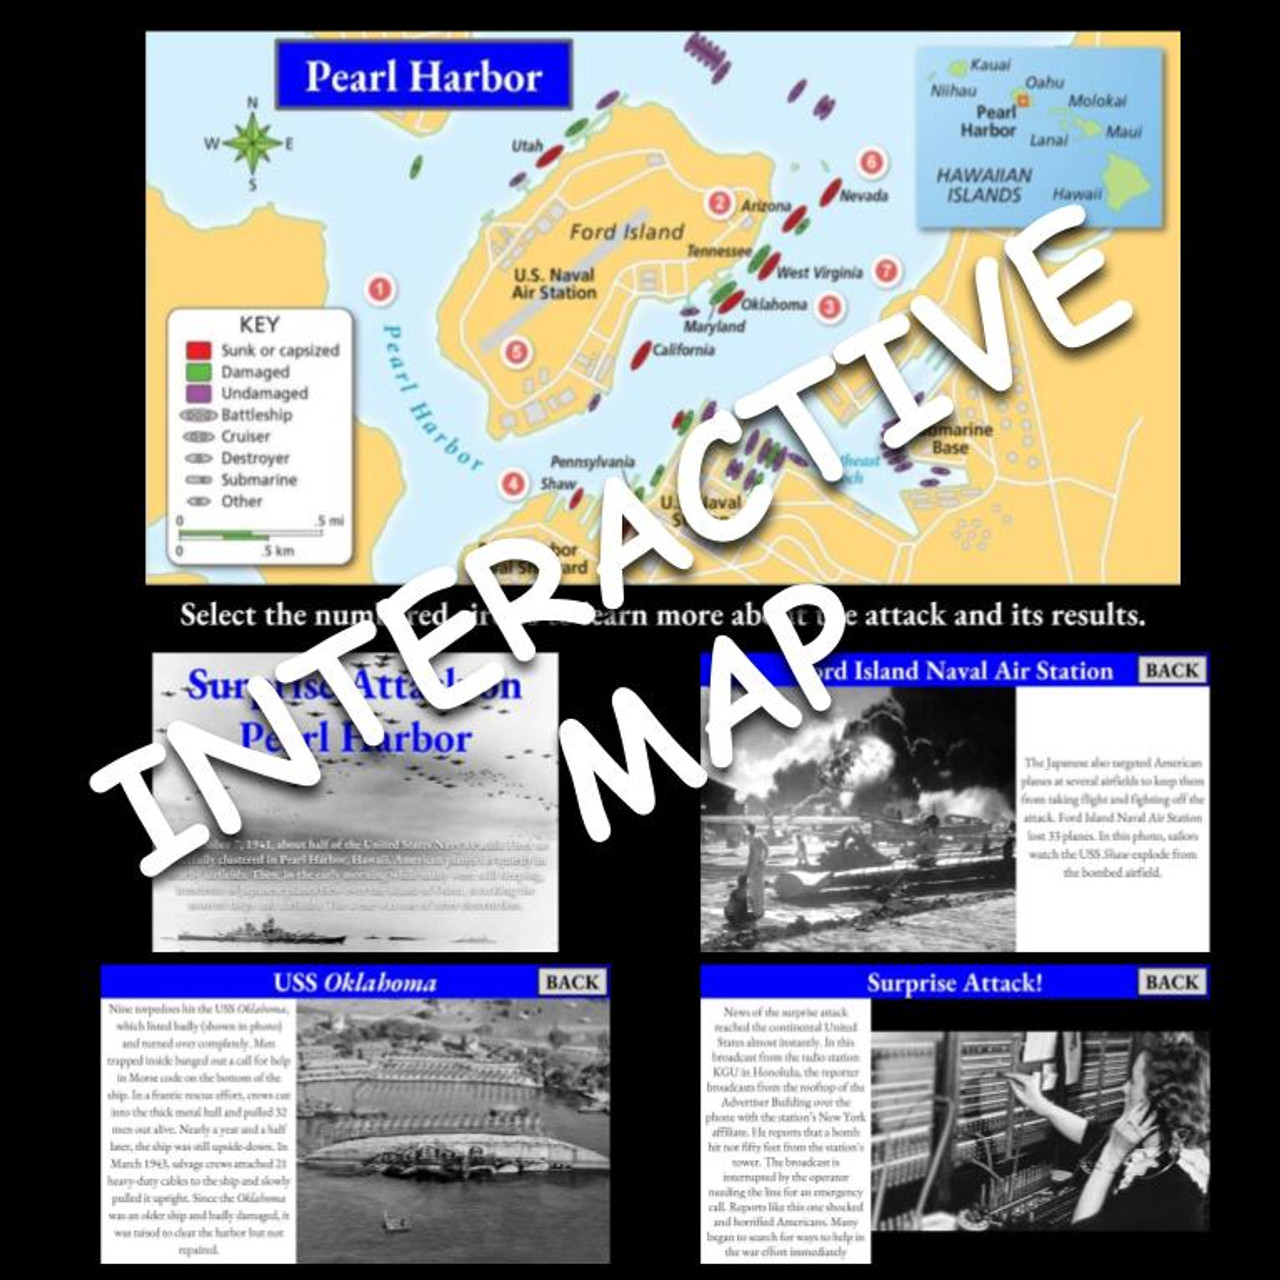 Interactive Map: Pearl Harbor and Japanese Aggression (1941-1942)